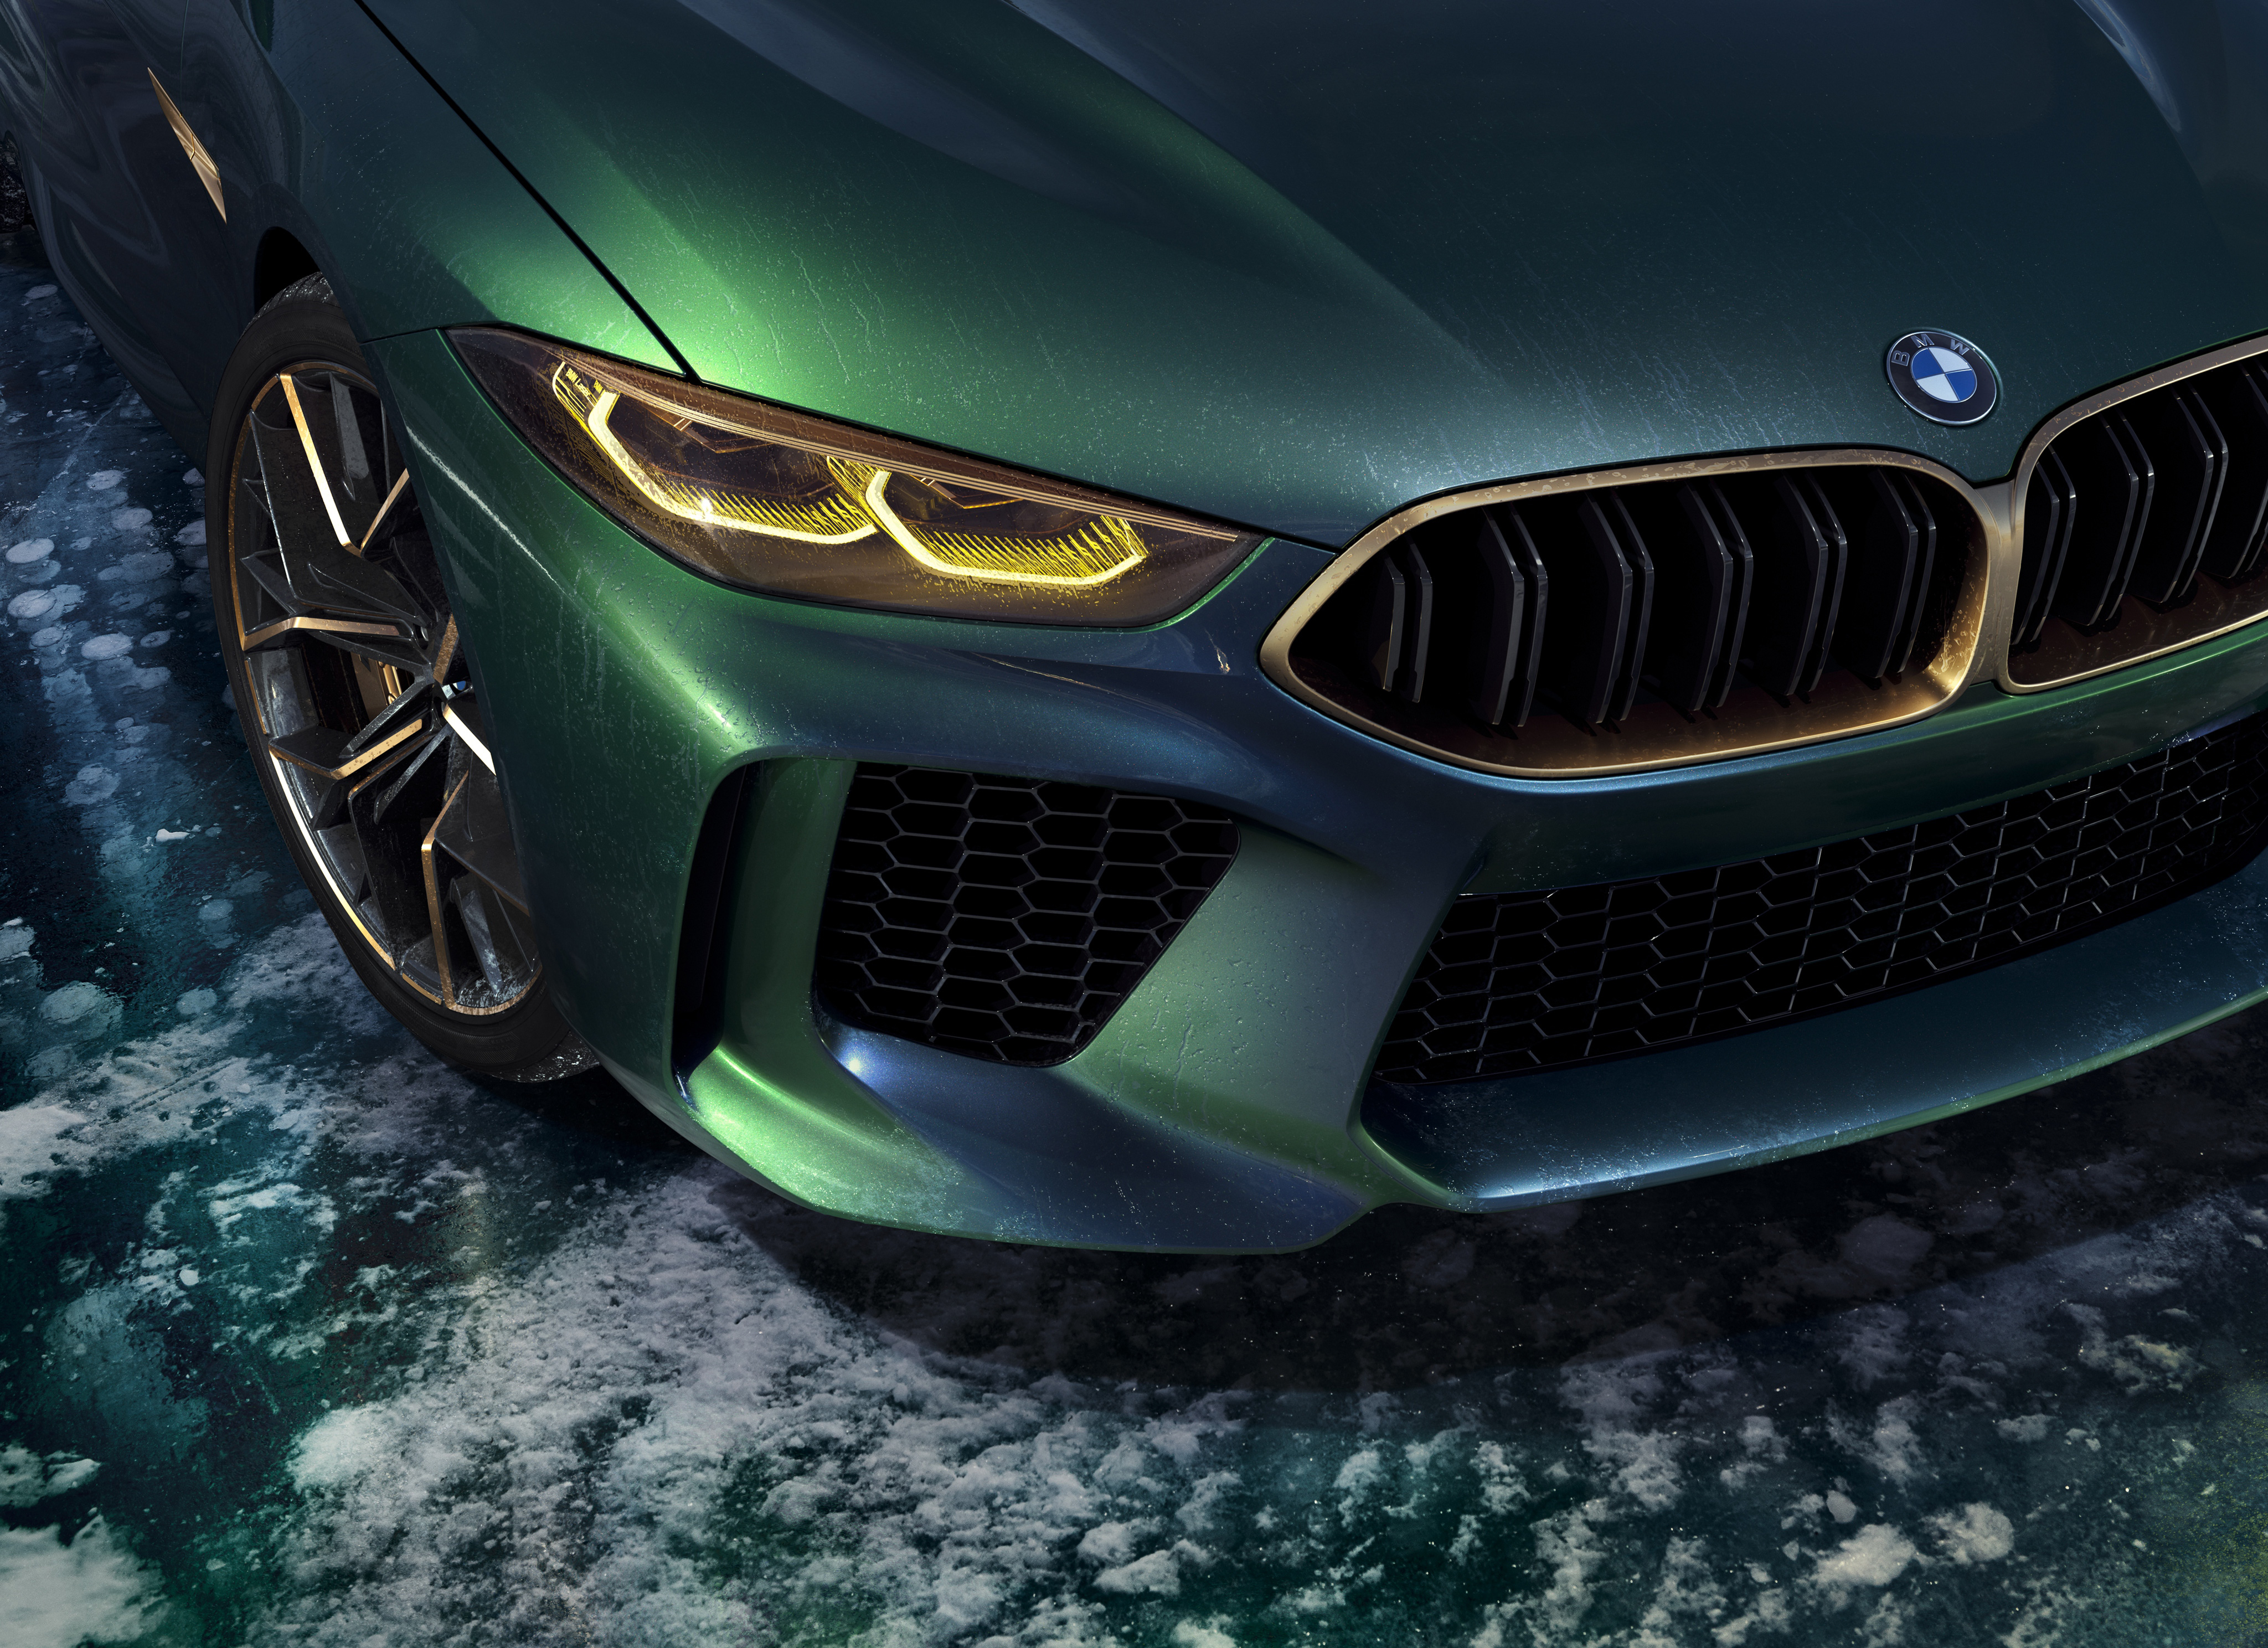 Bmw concept m8 gran coupe in green